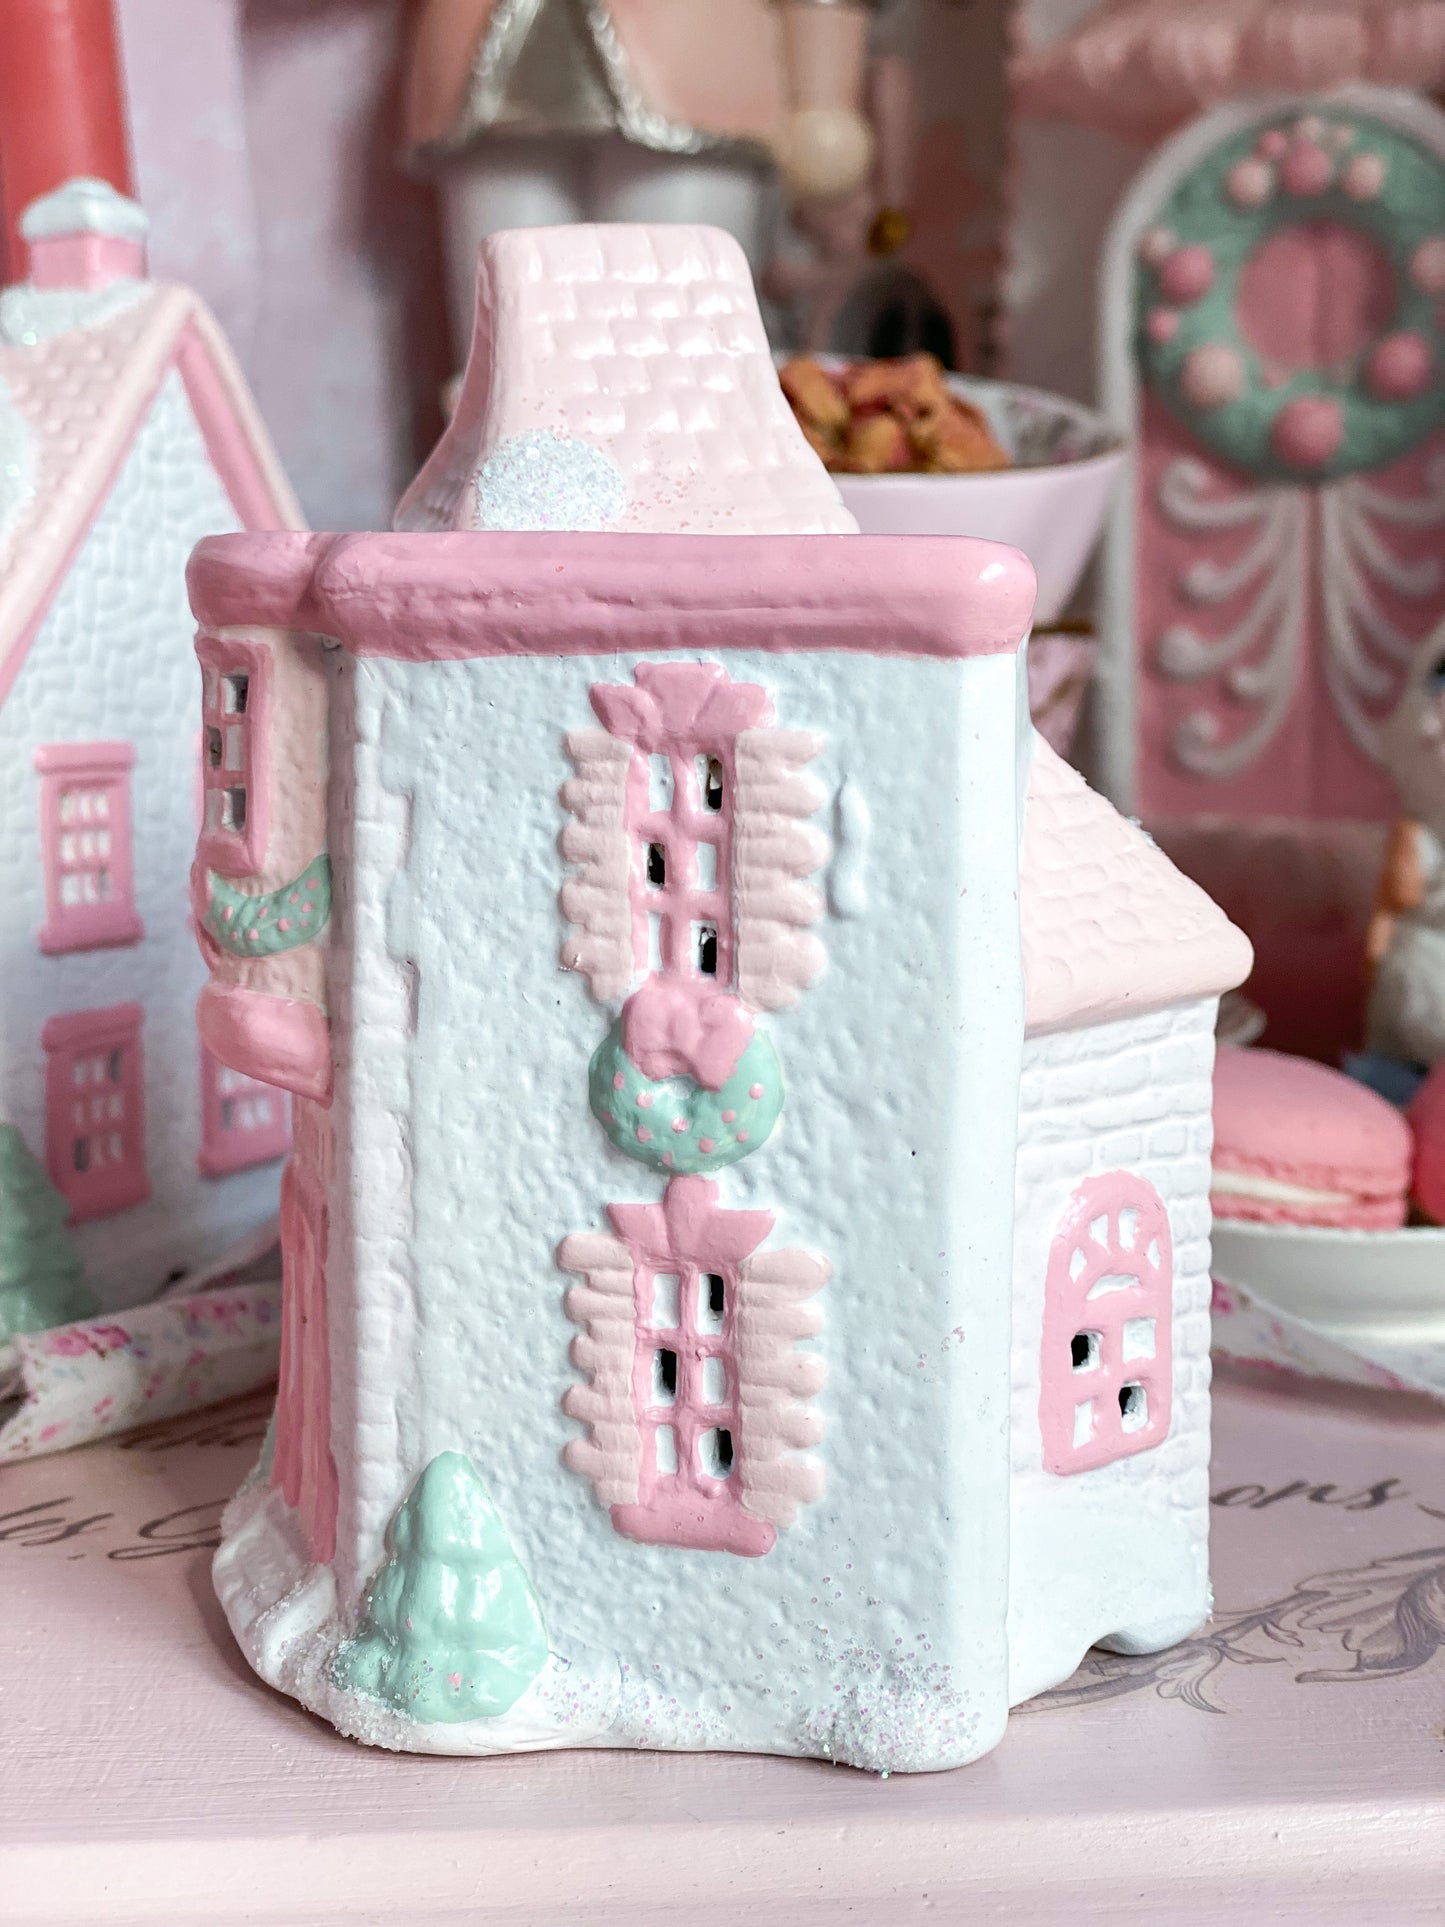 Bespoke Pastel Pink and White Petite Christmas Village Post Office PRE-ORDER